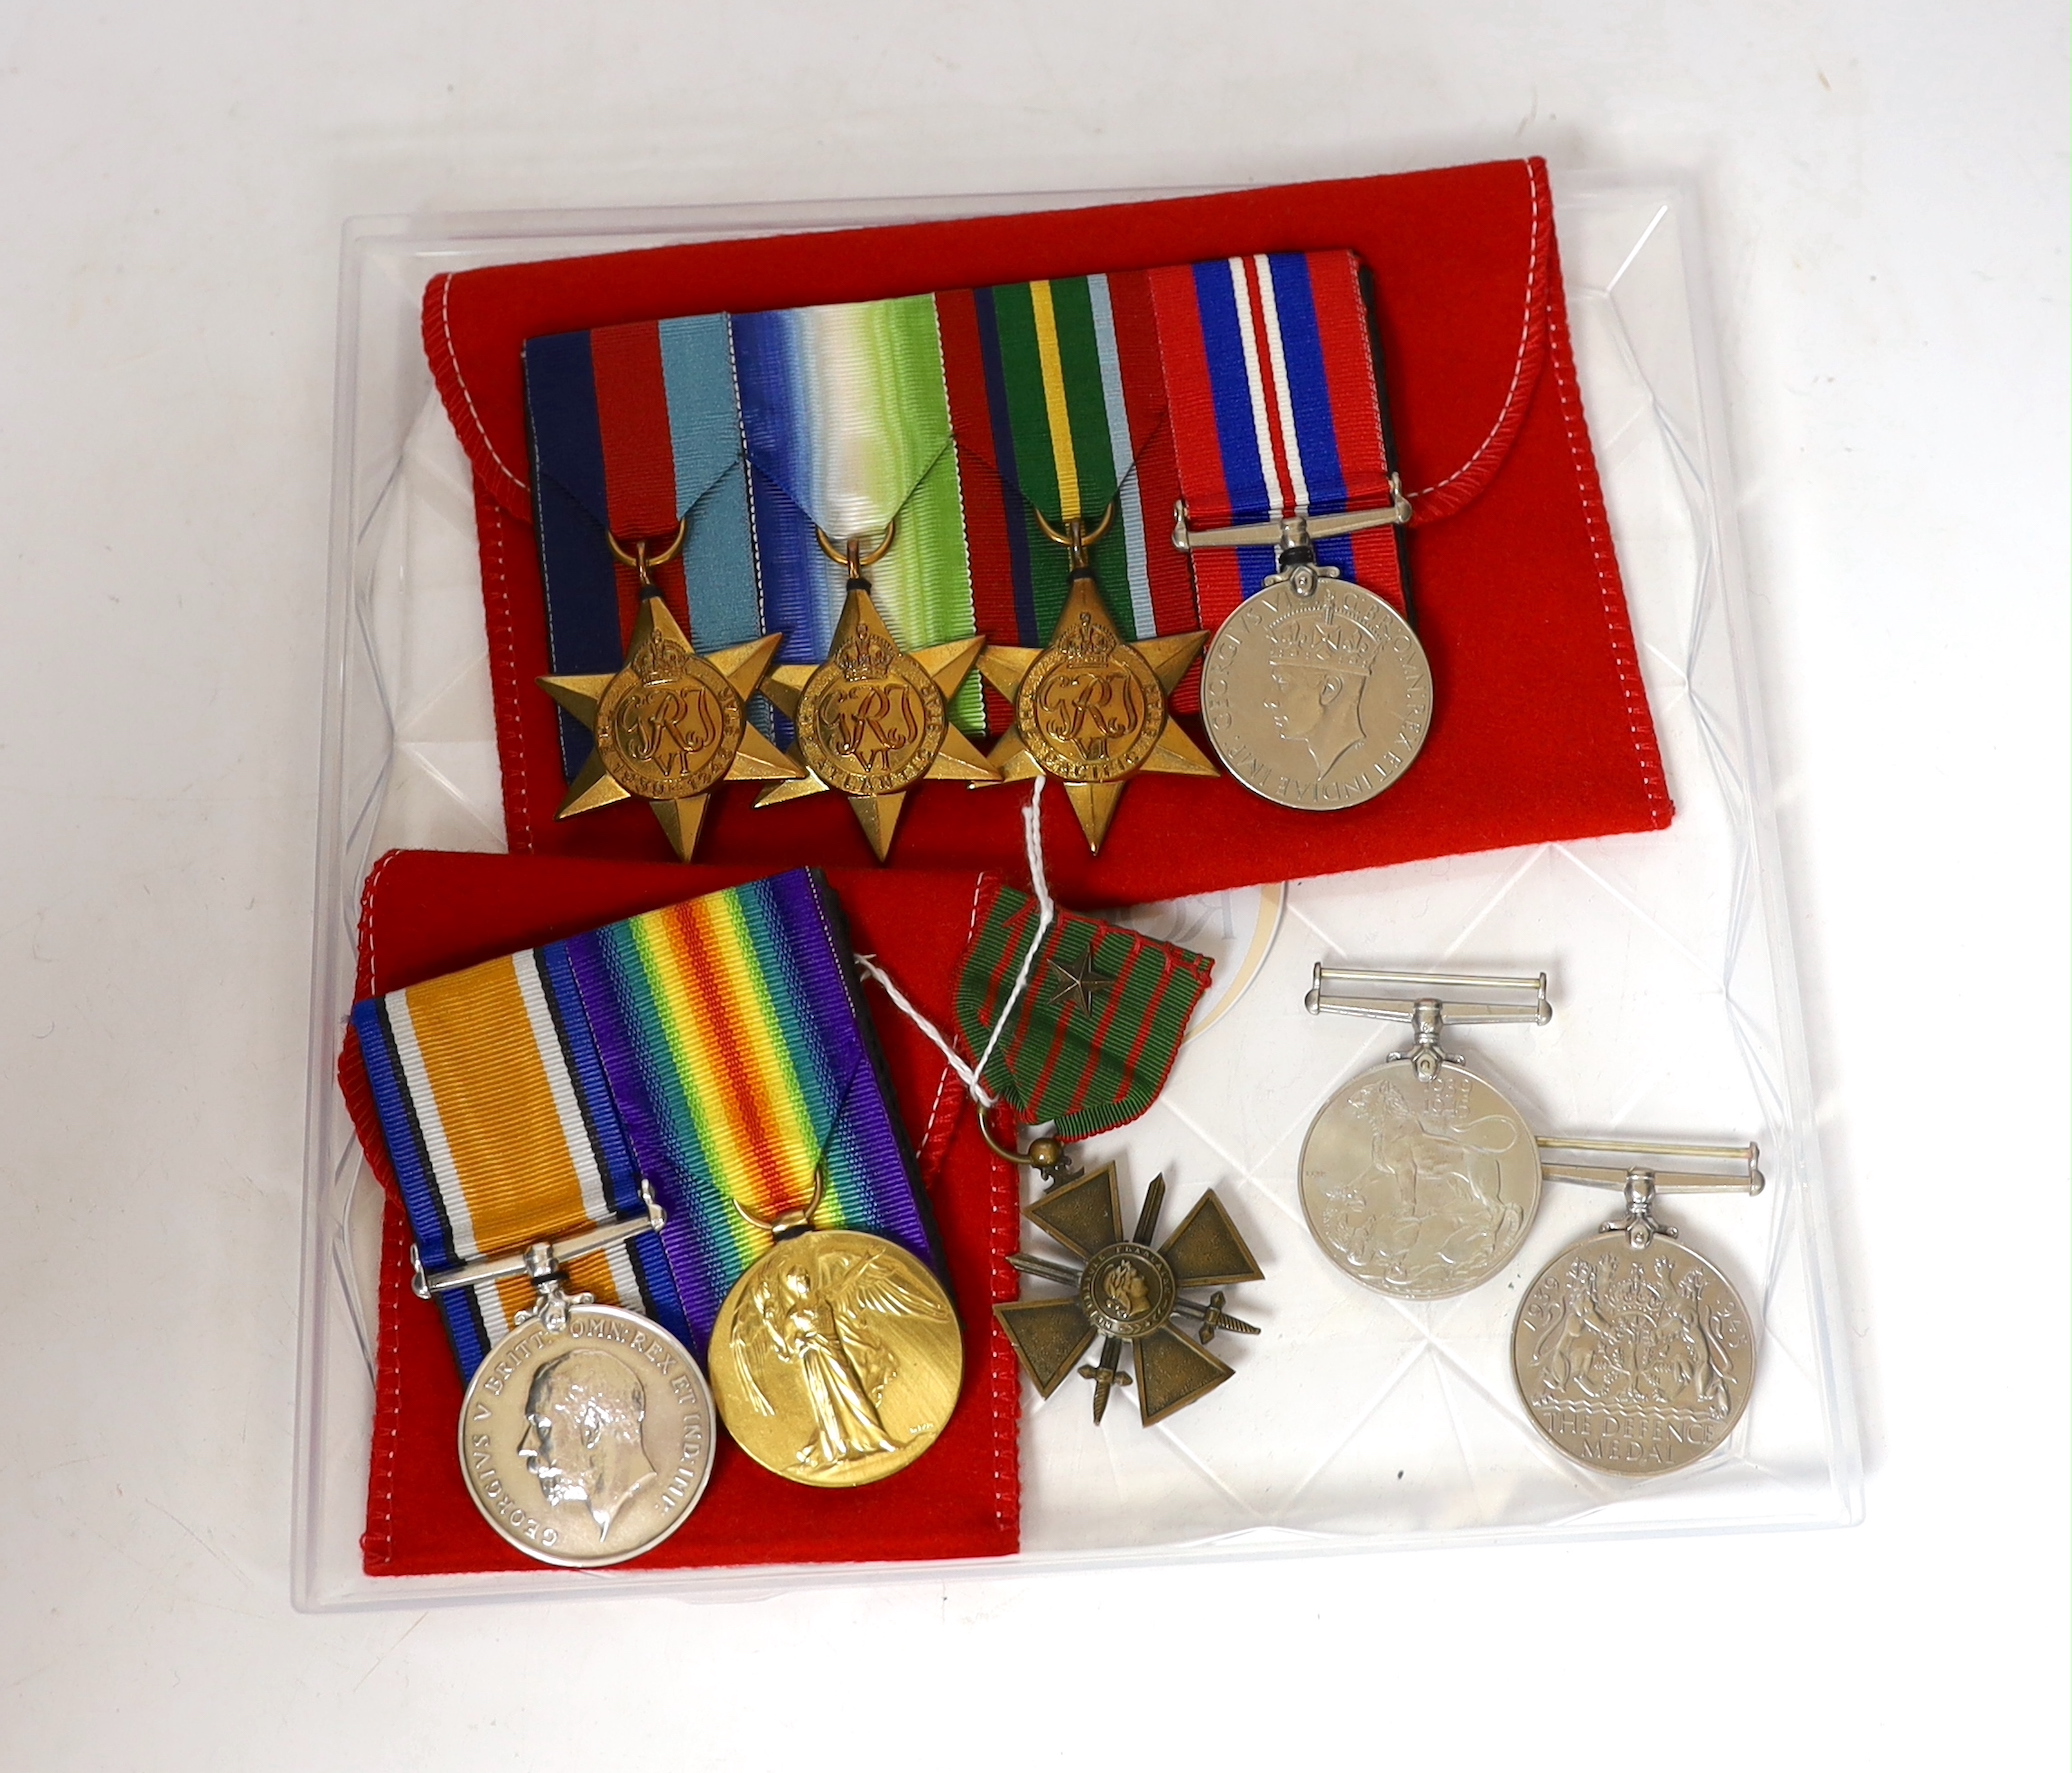 Nine WWI / WWII medals; a pair of WWI medals, the War medal and Victory medal to J.R. Hemmings R.A.F., a pair of WWII medals in O.H.M.S. card box to J.B. Robinson, with oak leaf, a group comprising; the 1939-45 Star, the